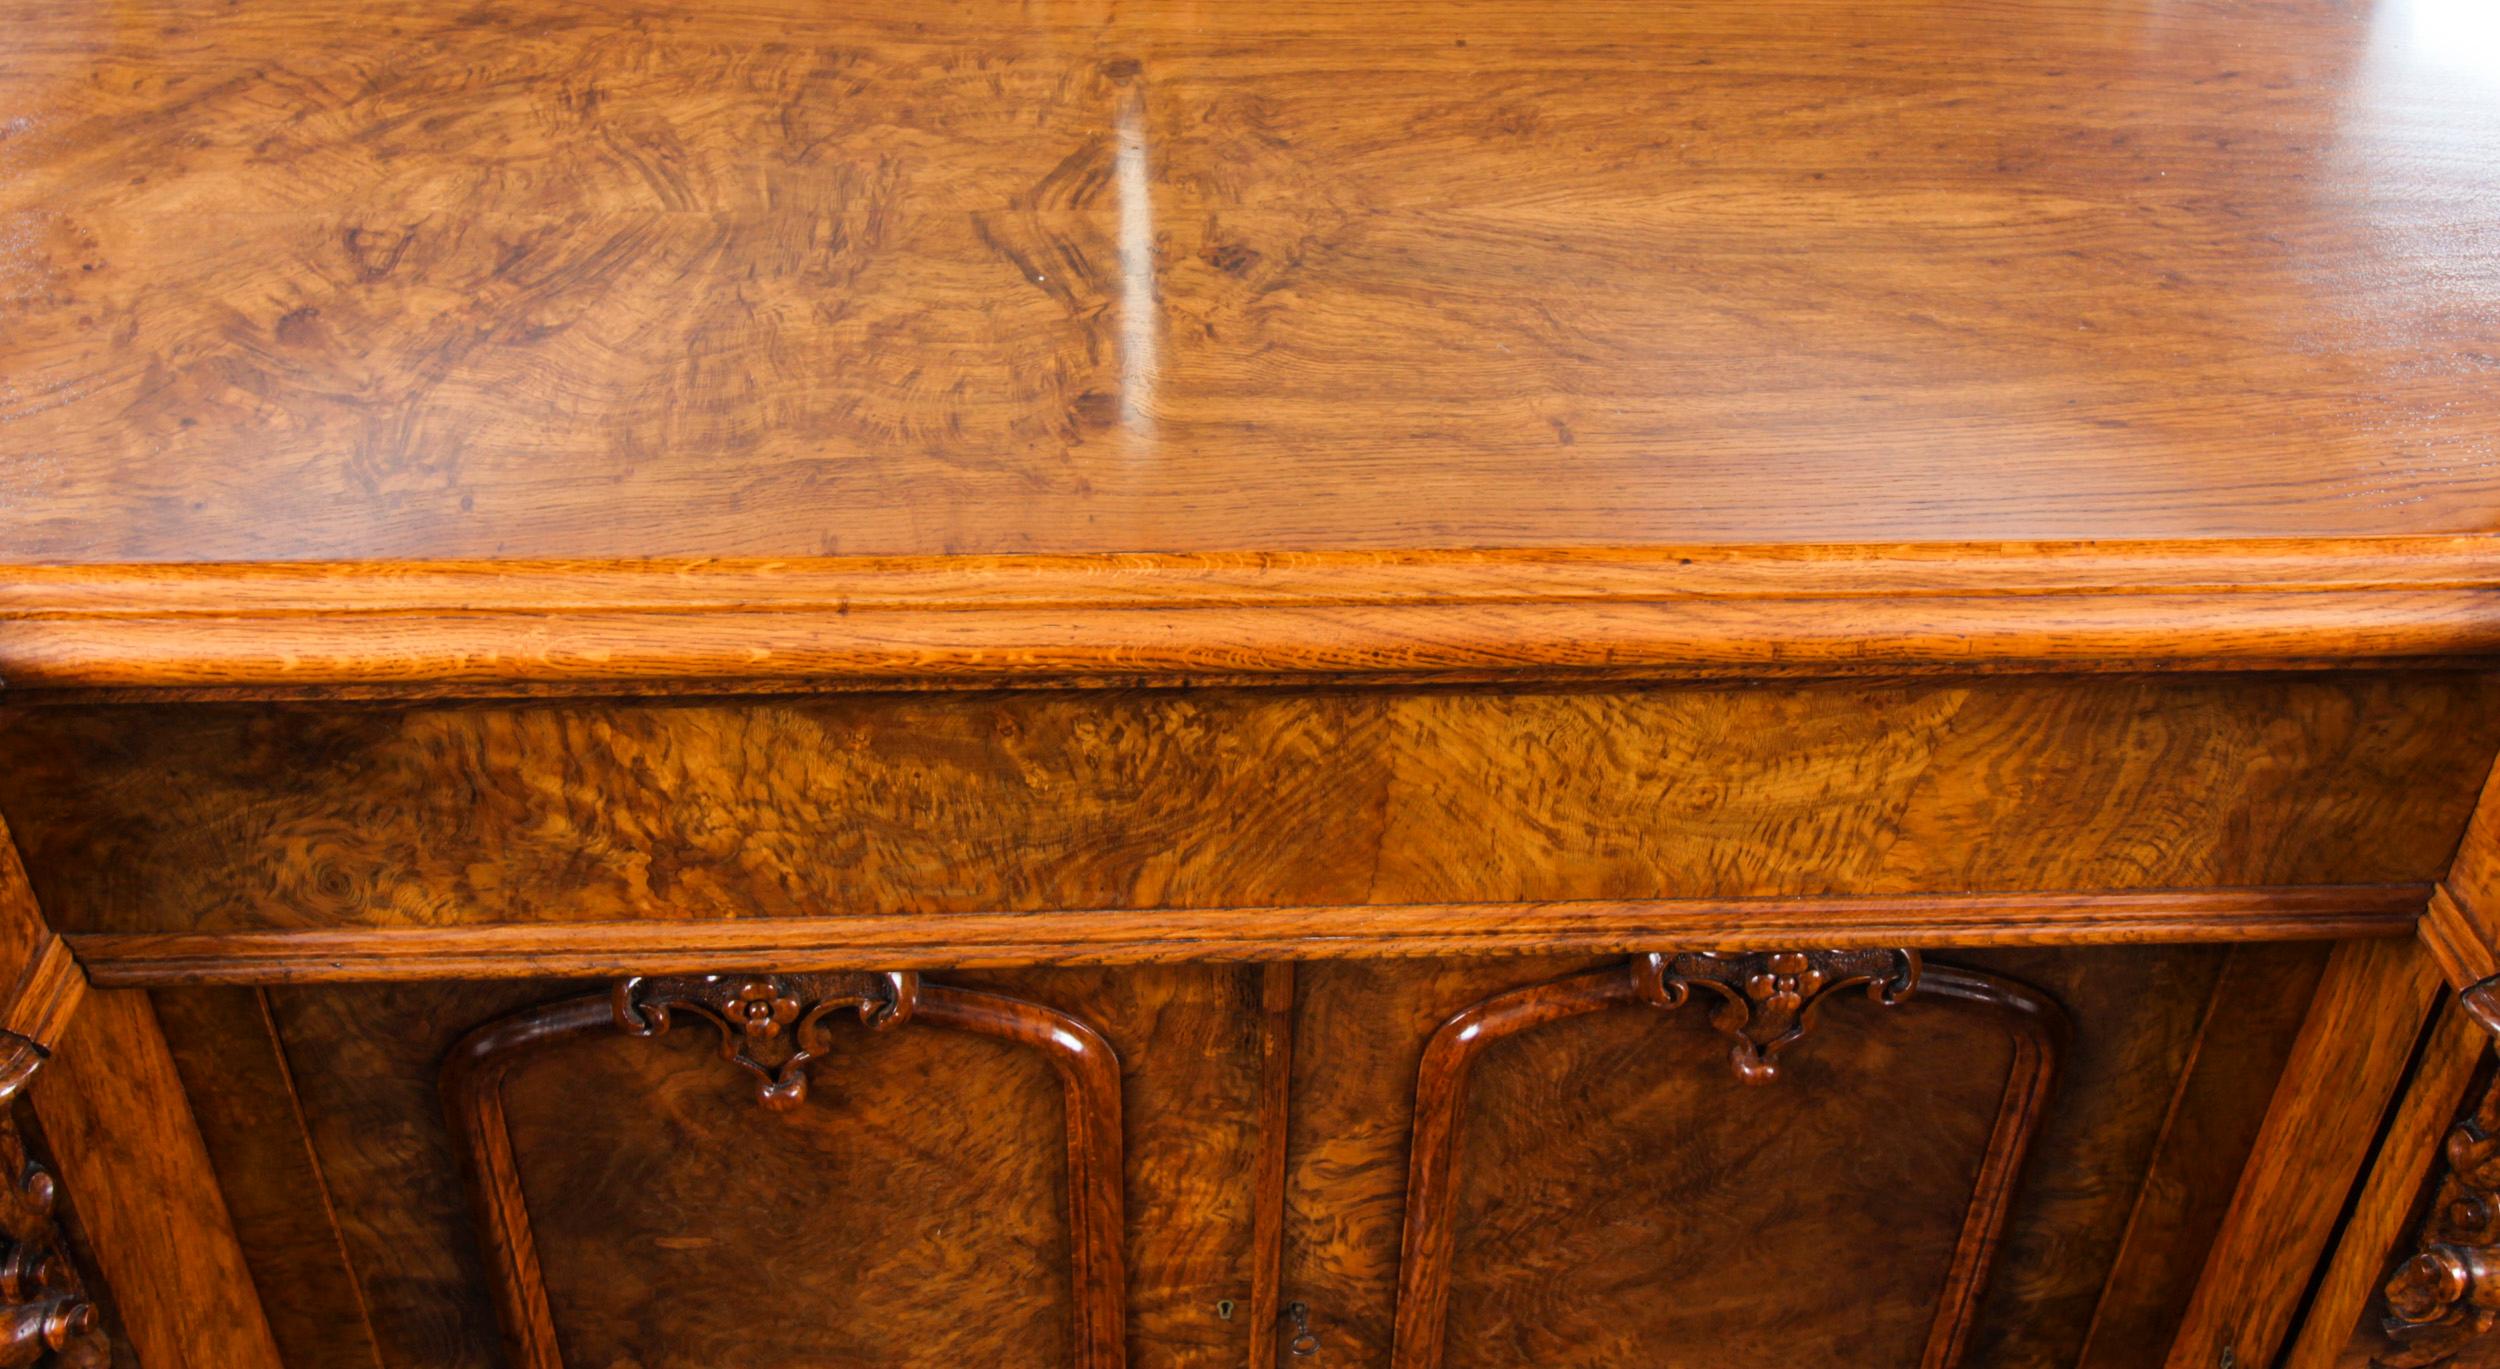 An impressive large and rear early Victorian carved pollard oak mirror back sideboard, Circa 1850 in date.

The inverse breakfront sideboard features a shaped mirror back with superbly hand carved and pierced floral cresting and corners, set above